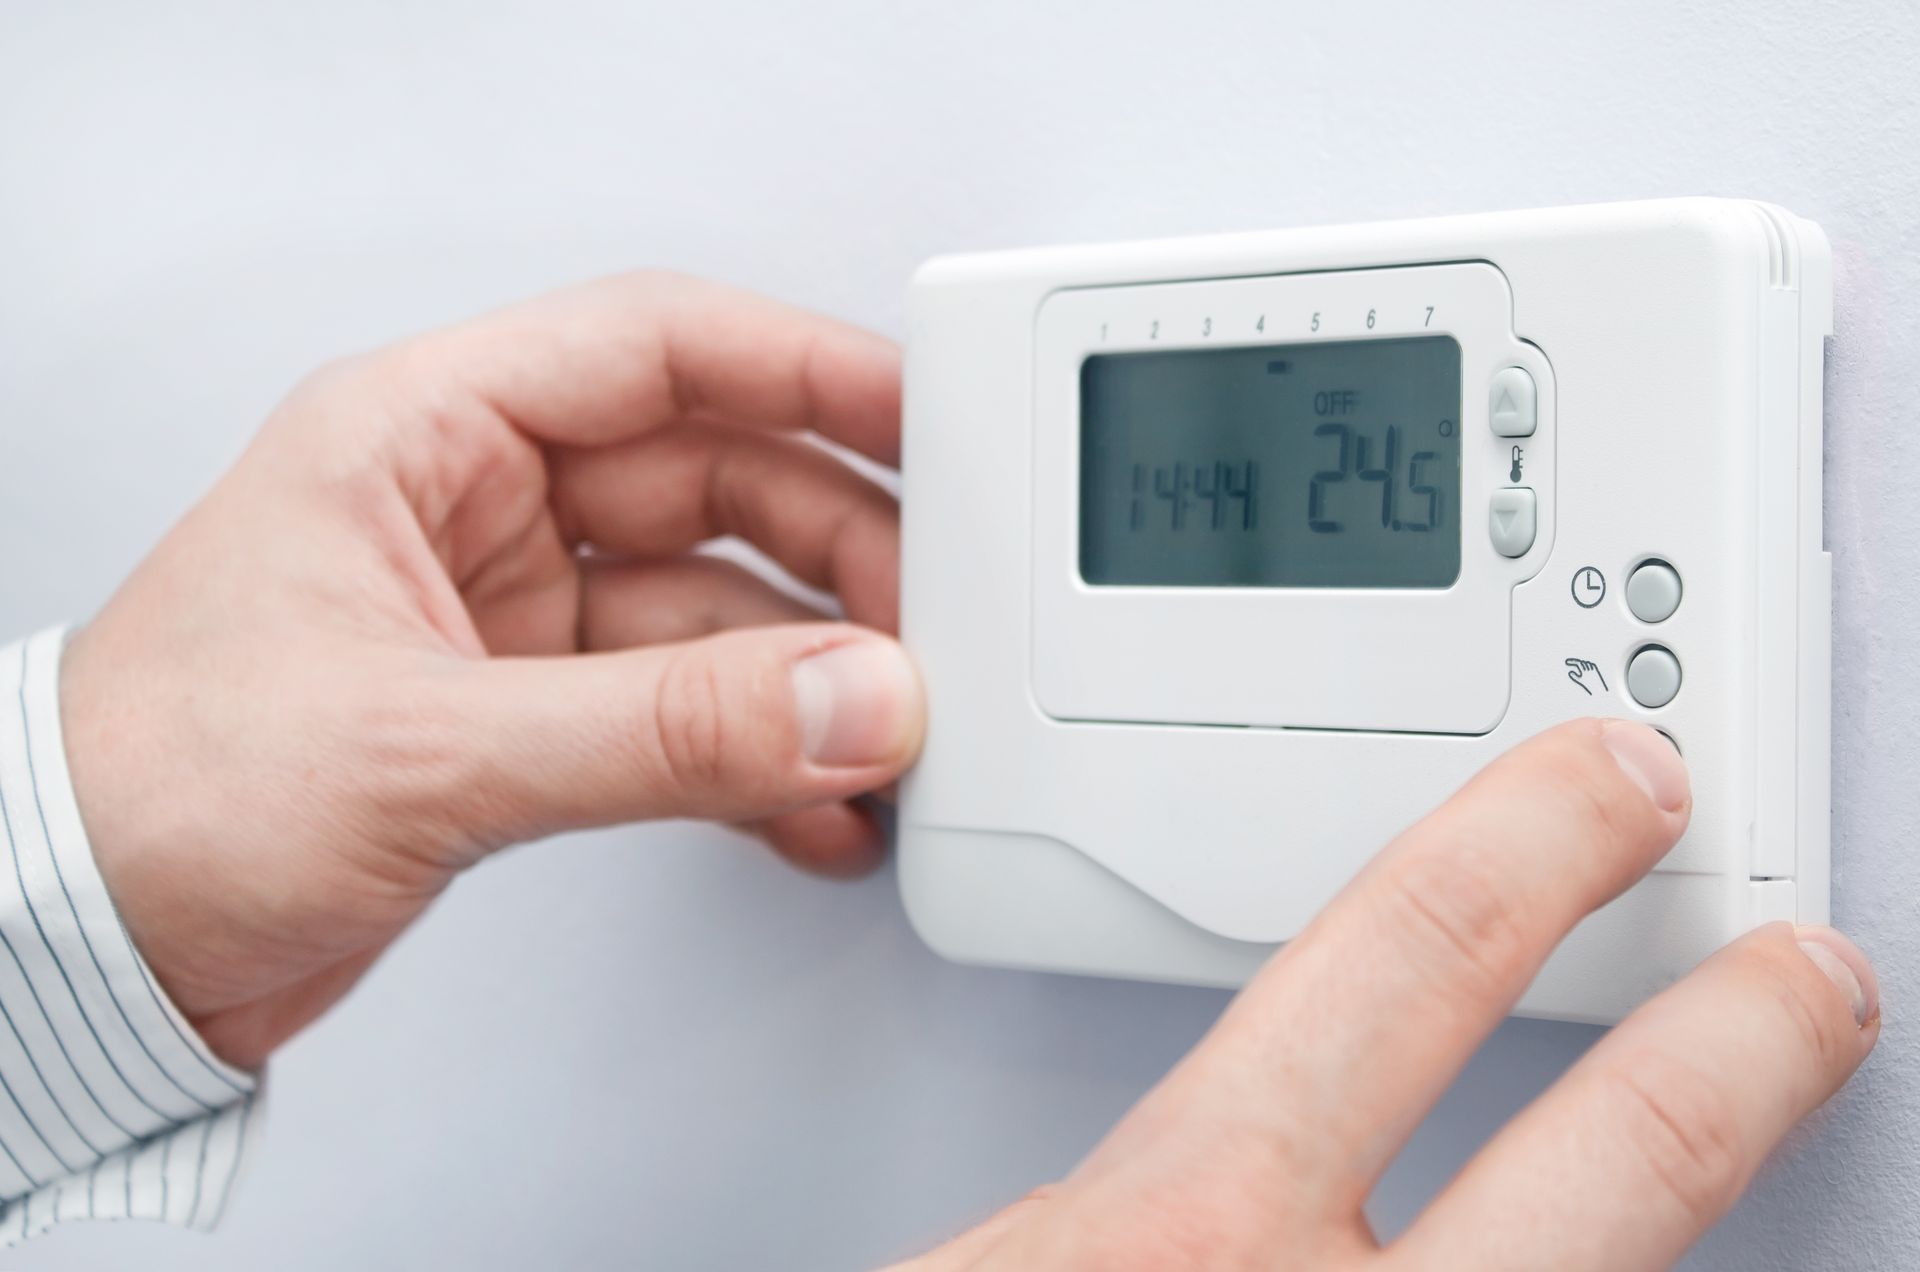 a person is using a thermostat to set the temperature to 24 degrees